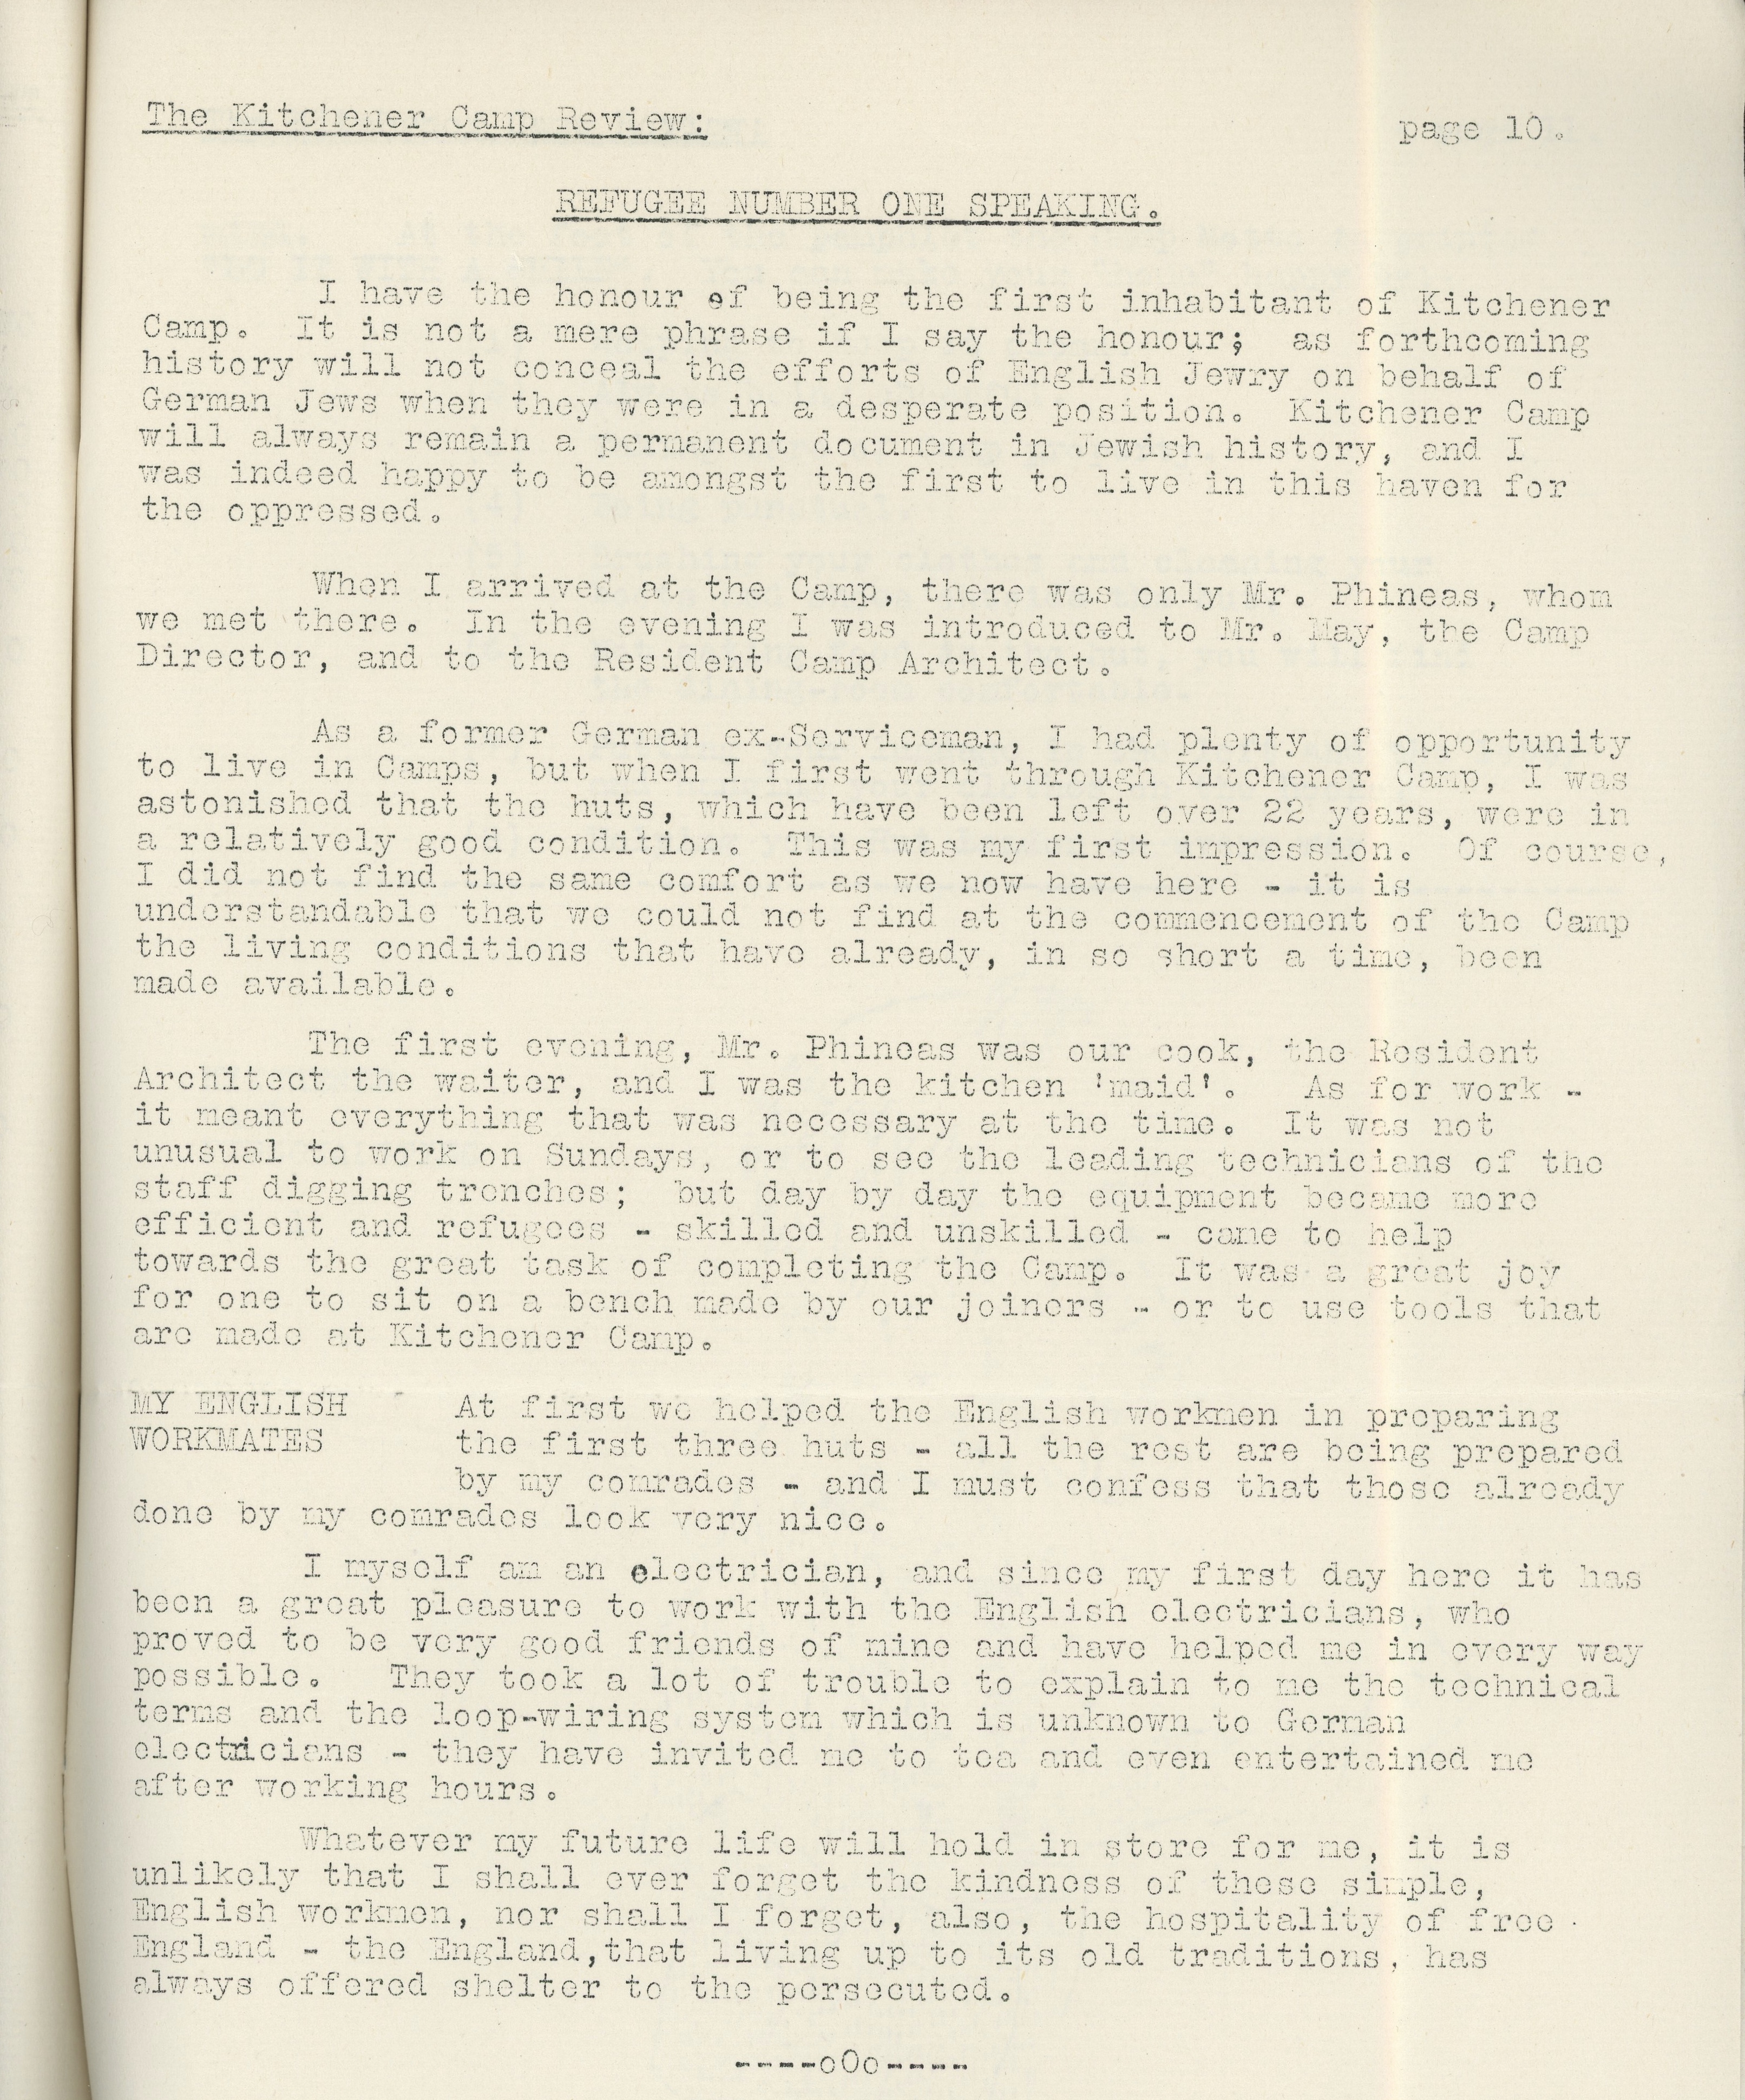 Kitchener Camp Review, April 1939, page 10, top